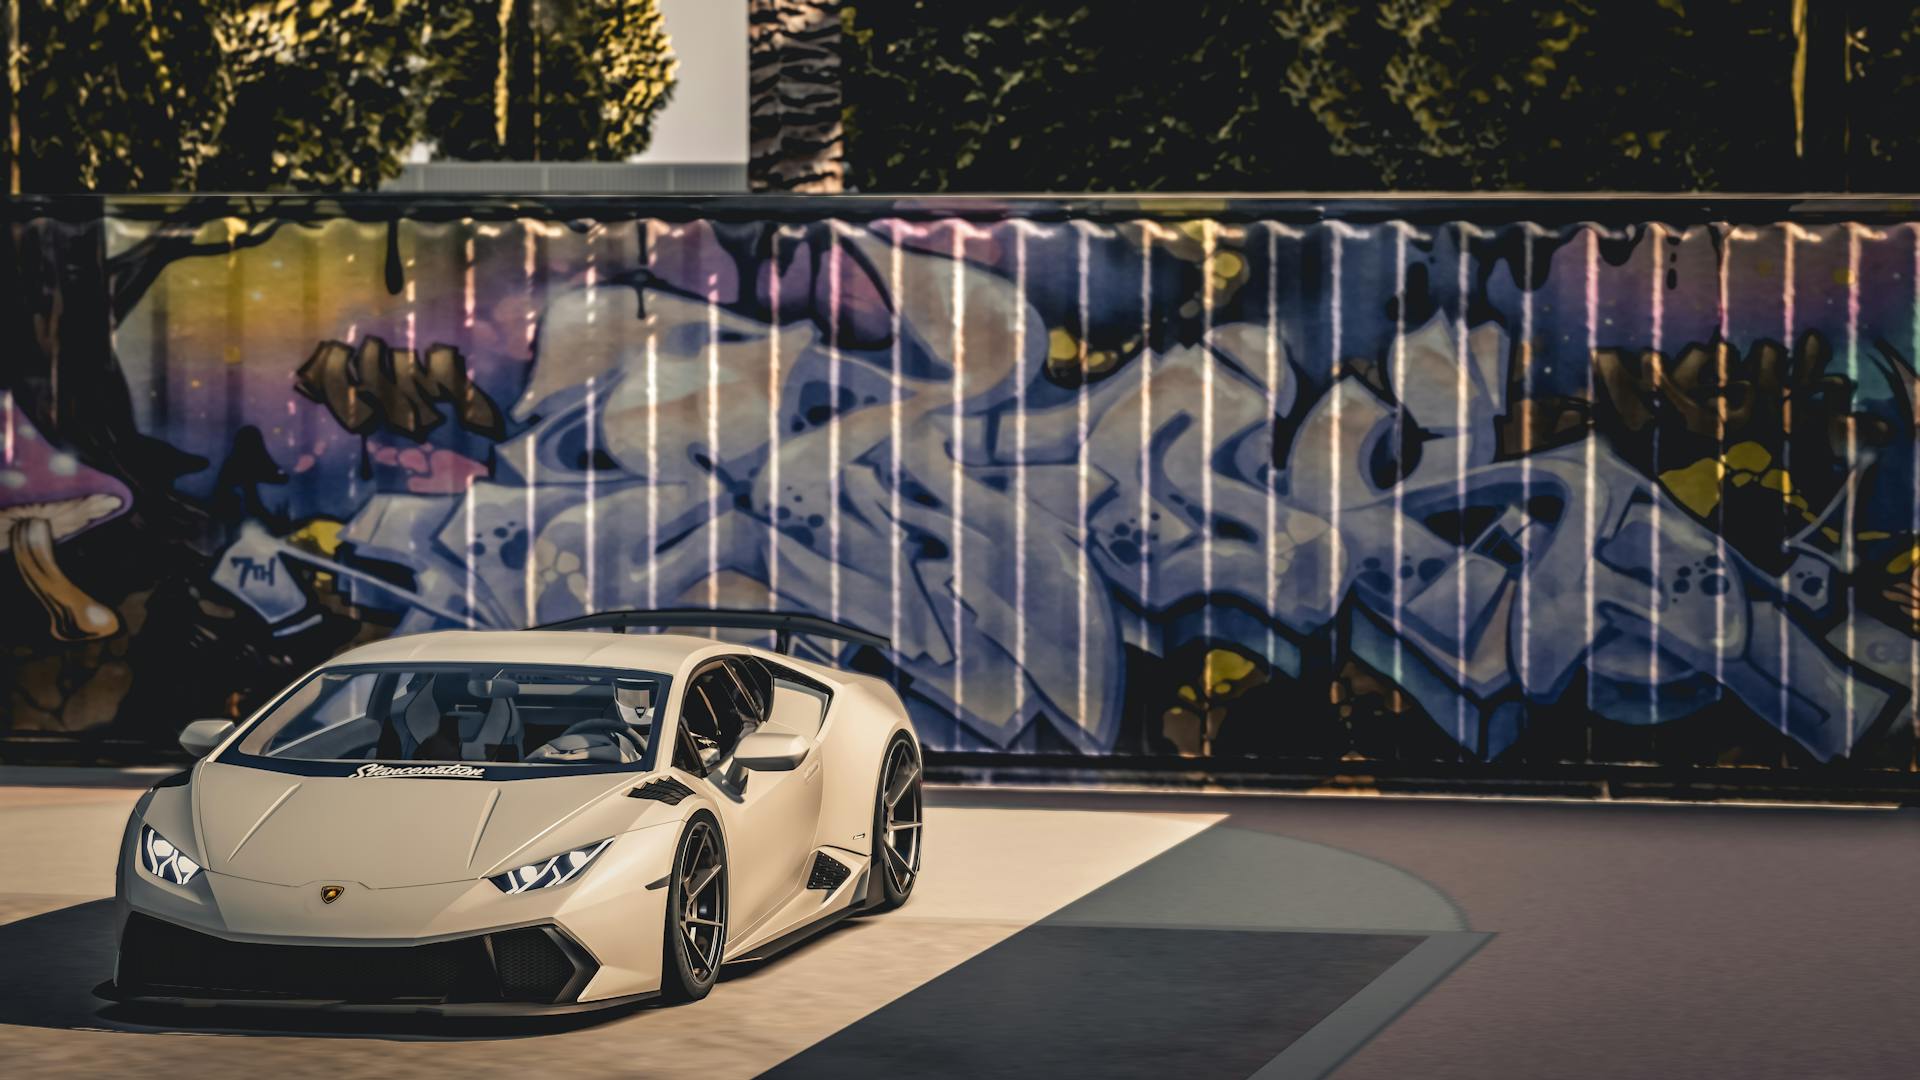 A Lamborghini sits parked outdoors in front of a wall filled with graffiti.